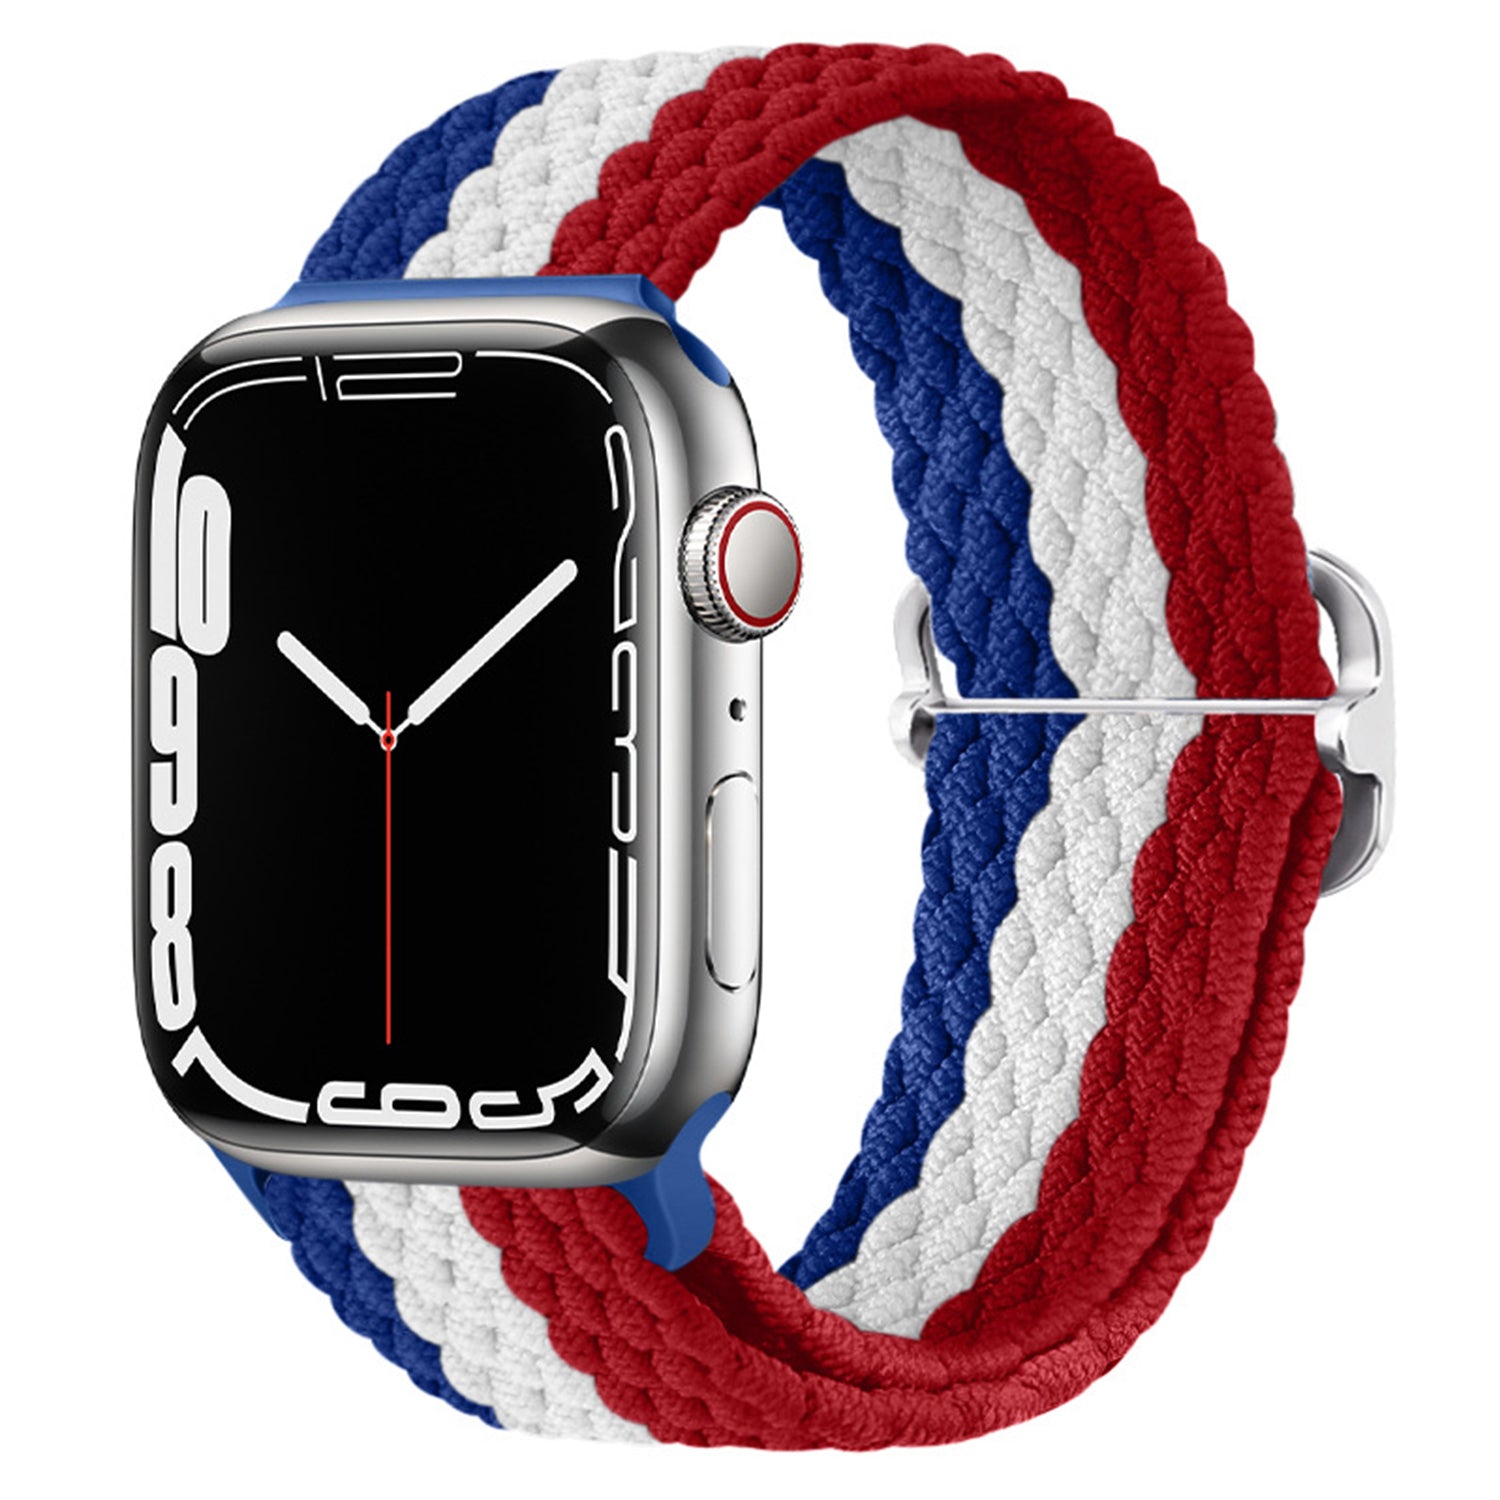 38/40mm Twister Braided Solo Loop Fabric Nylon and stainless steel buckle adjustable Strap,suitable for Apple watch series SE/ 7 / 6 / 5 / 4 / 3